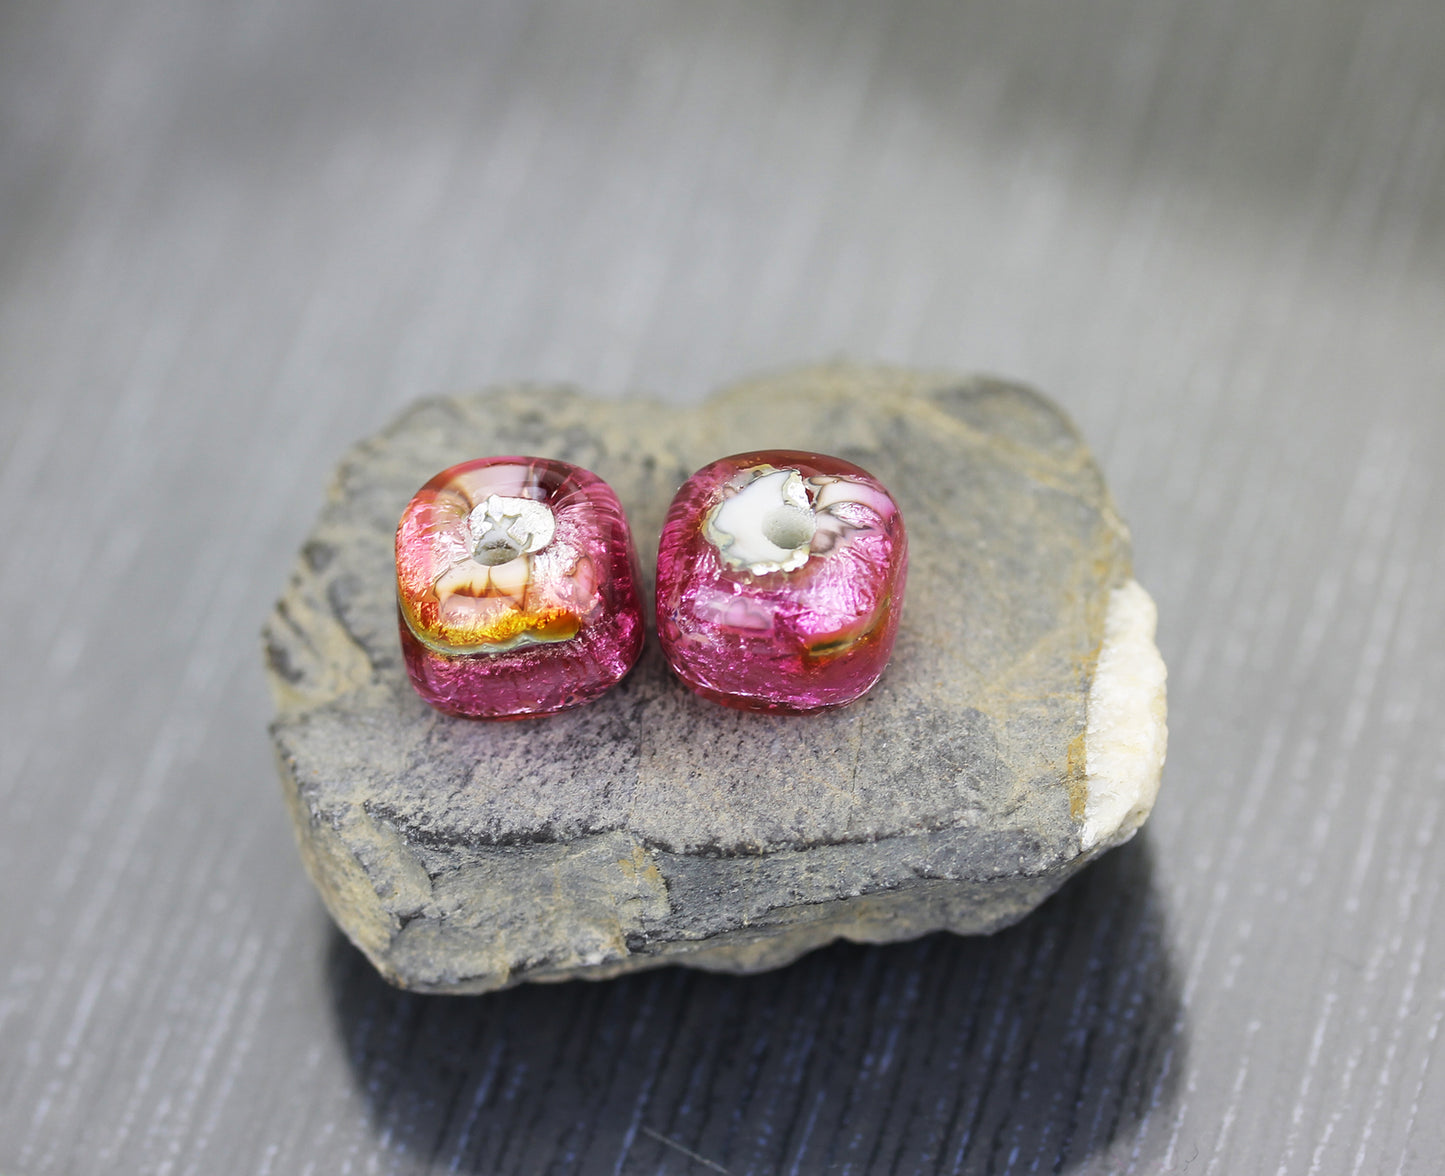 pair of hot pink sparkling Sea Rocks lampwork glass bead pairs by Anne Londez shaped like dice or cubes